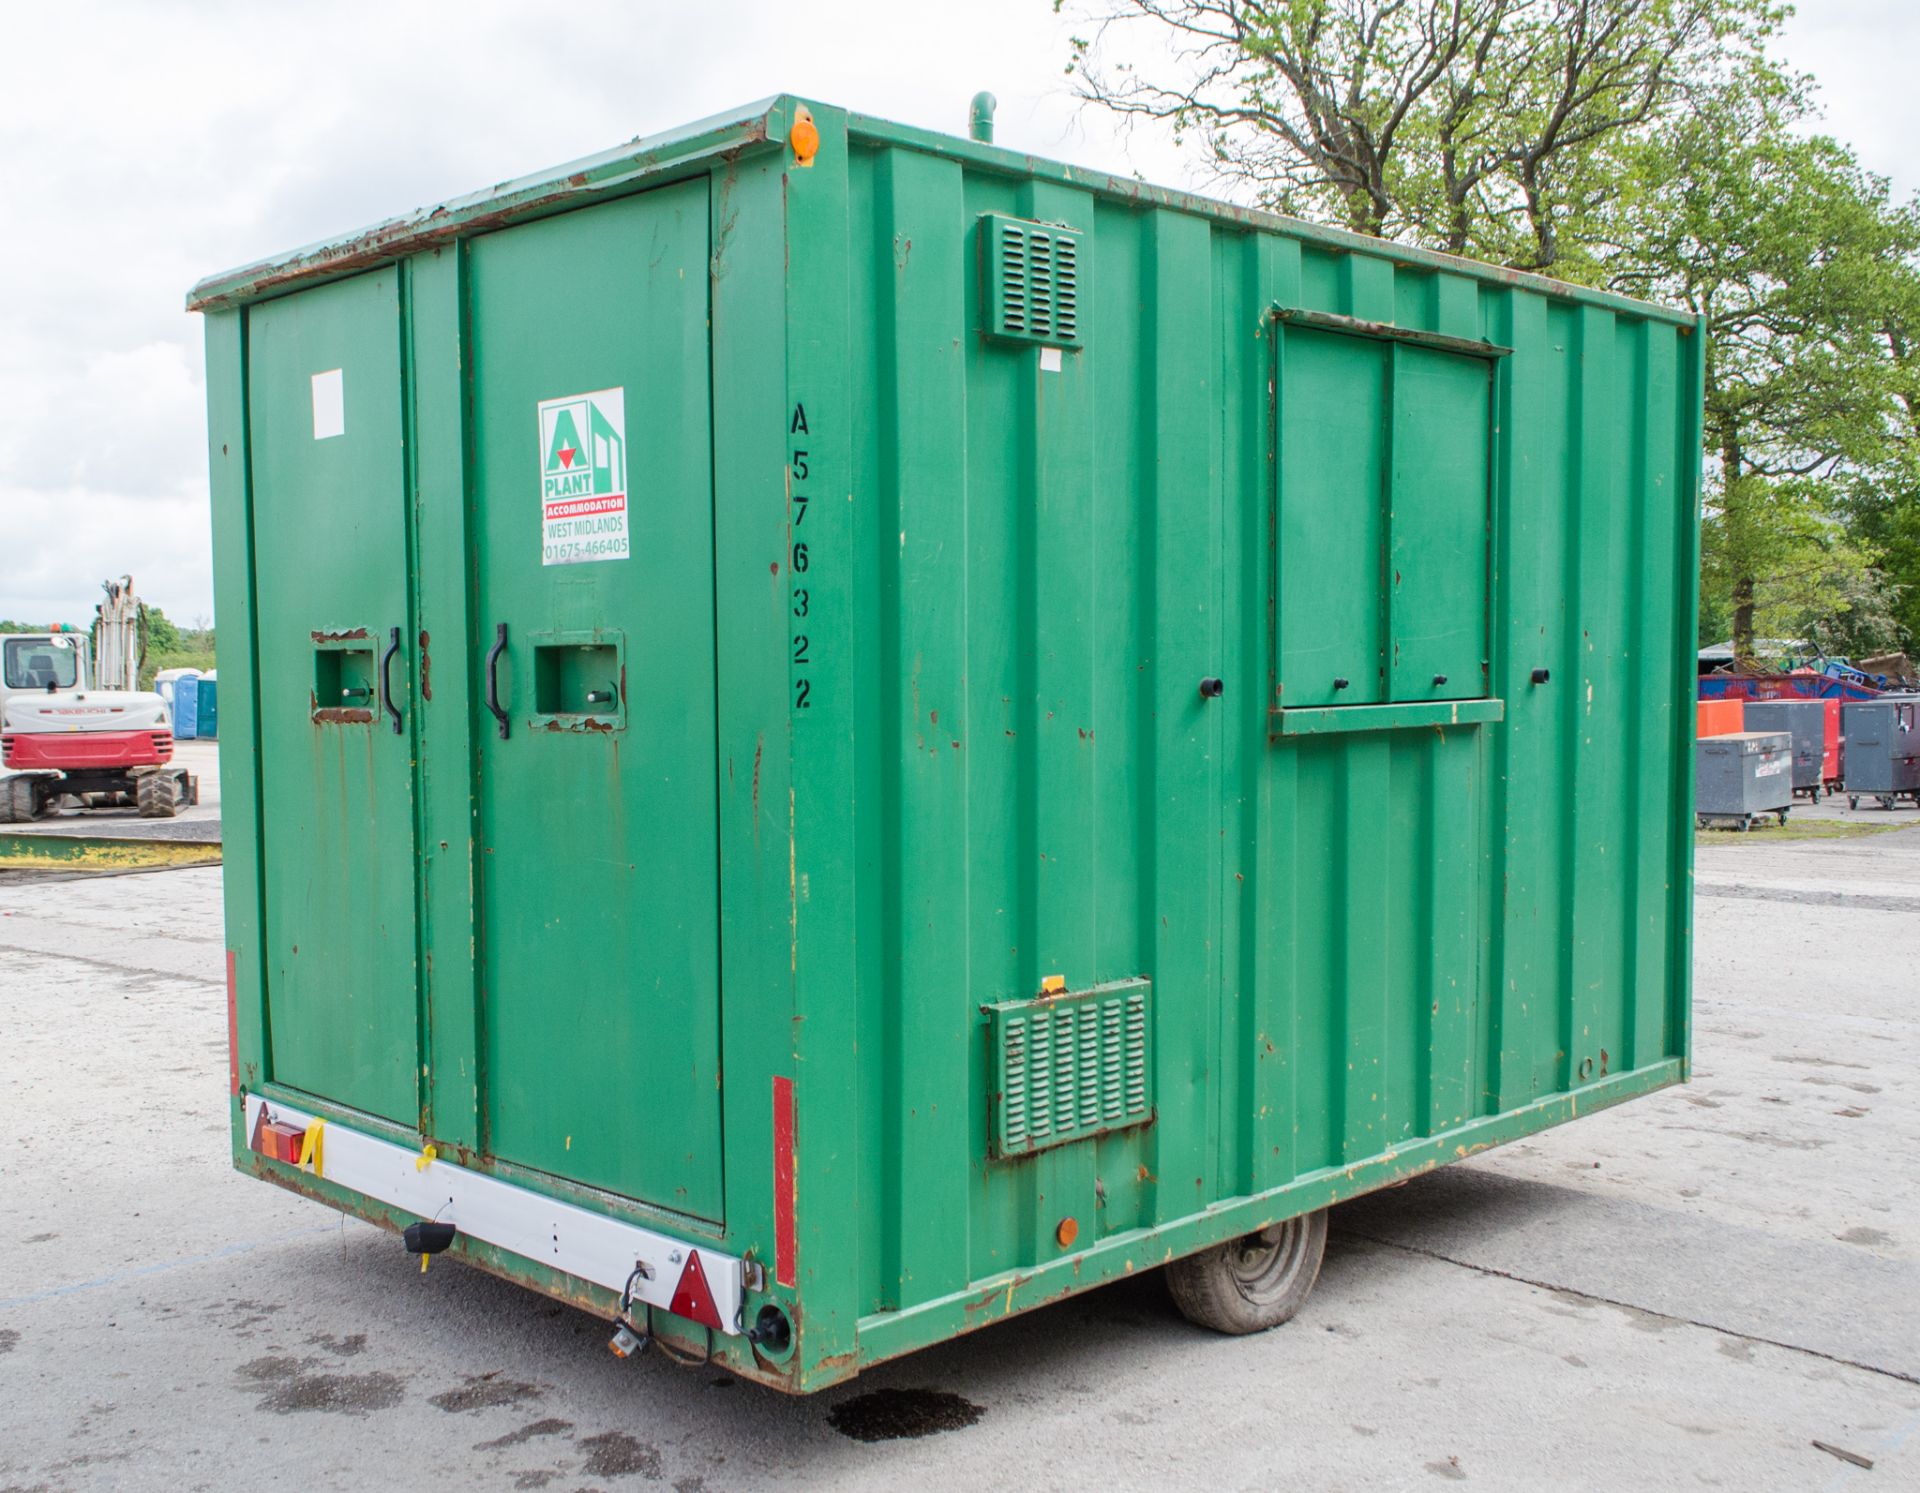 Groundhog 12 ft x 8 ft mobile welfare site unit Comprising of: canteen area, toilet & generator room - Image 3 of 9